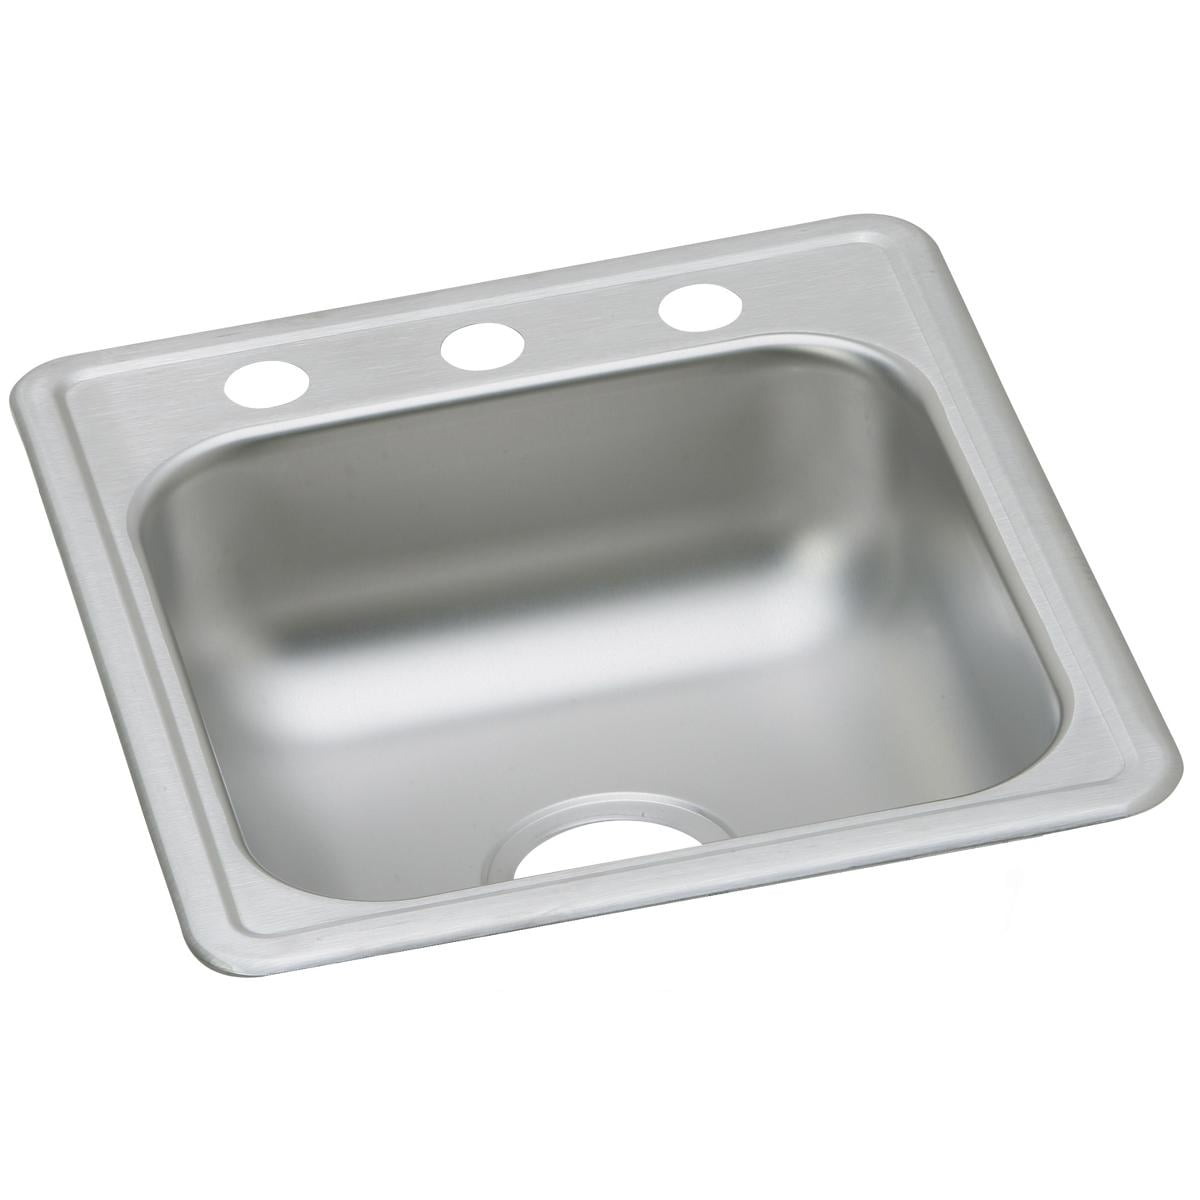 Equal Double Bowl Drop-in Sink Details about   Elkay Dayton Stainless Steel 25" x 19" x 6-5/16" 